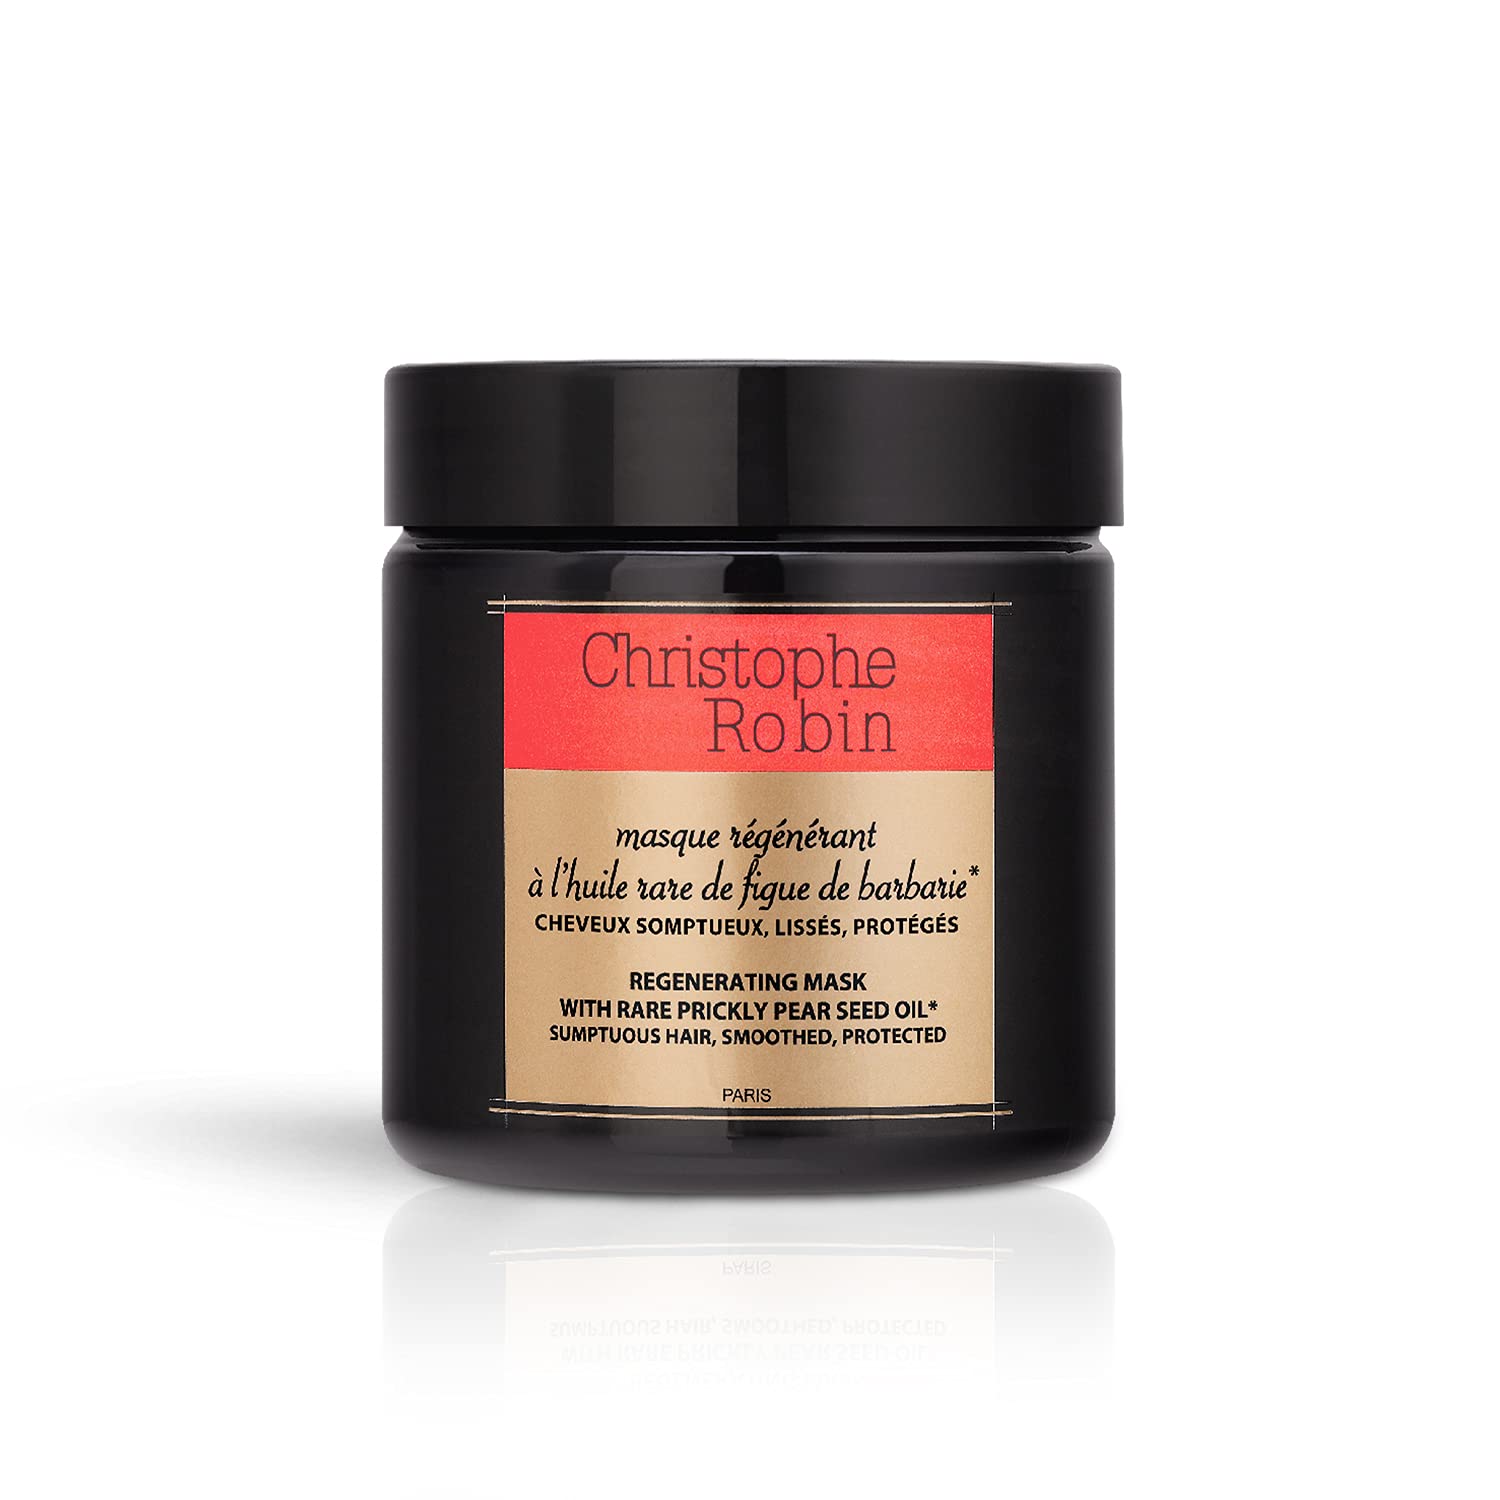 Christophe Robin Regenerating Mask with Rare Prick ly Pear Seed Oil Hair Mask 250 ml, color ‎no